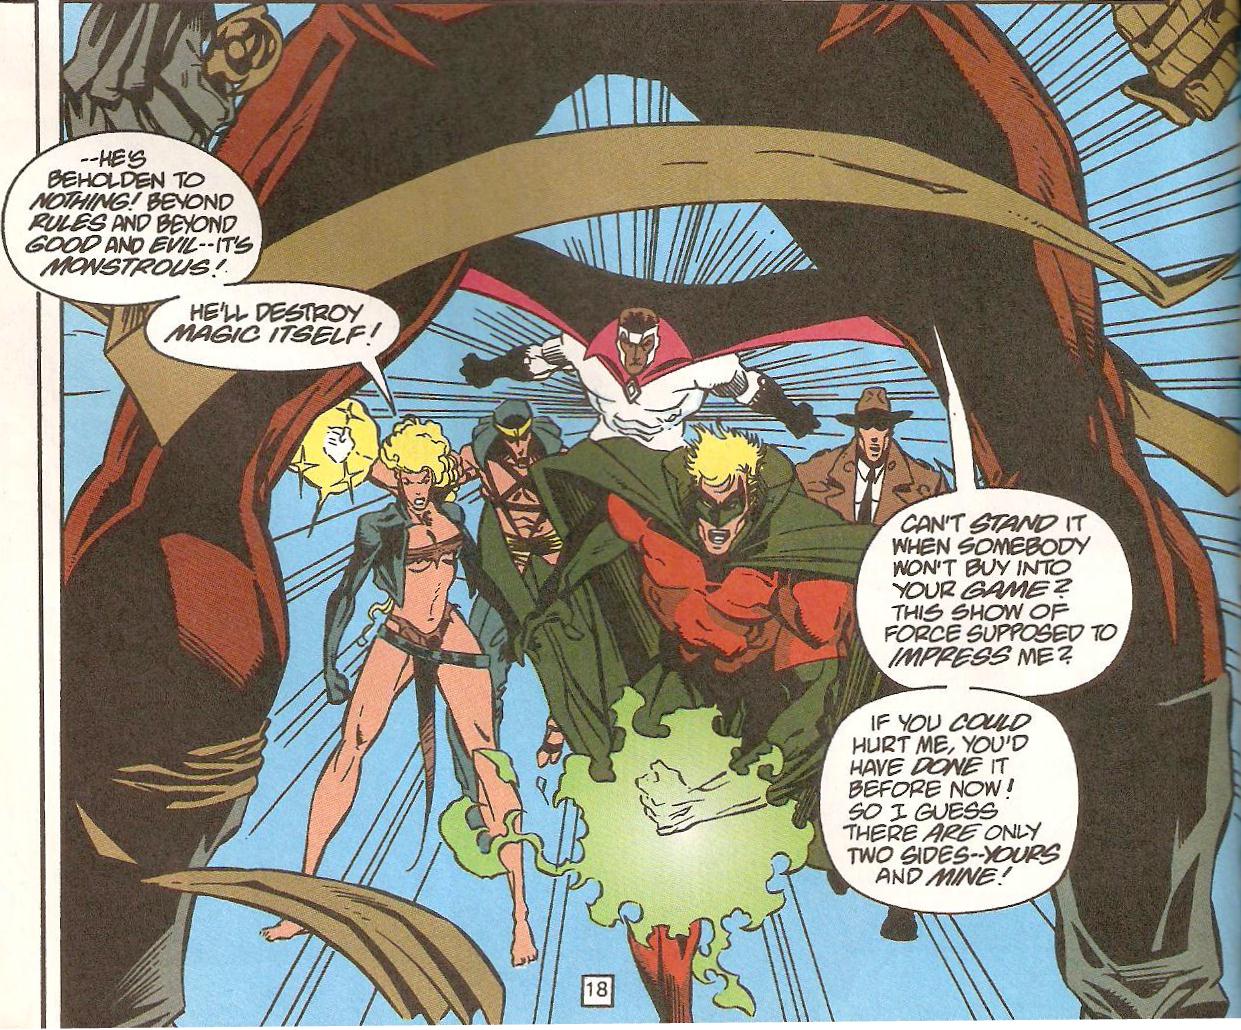 From Fate #5 (1995)